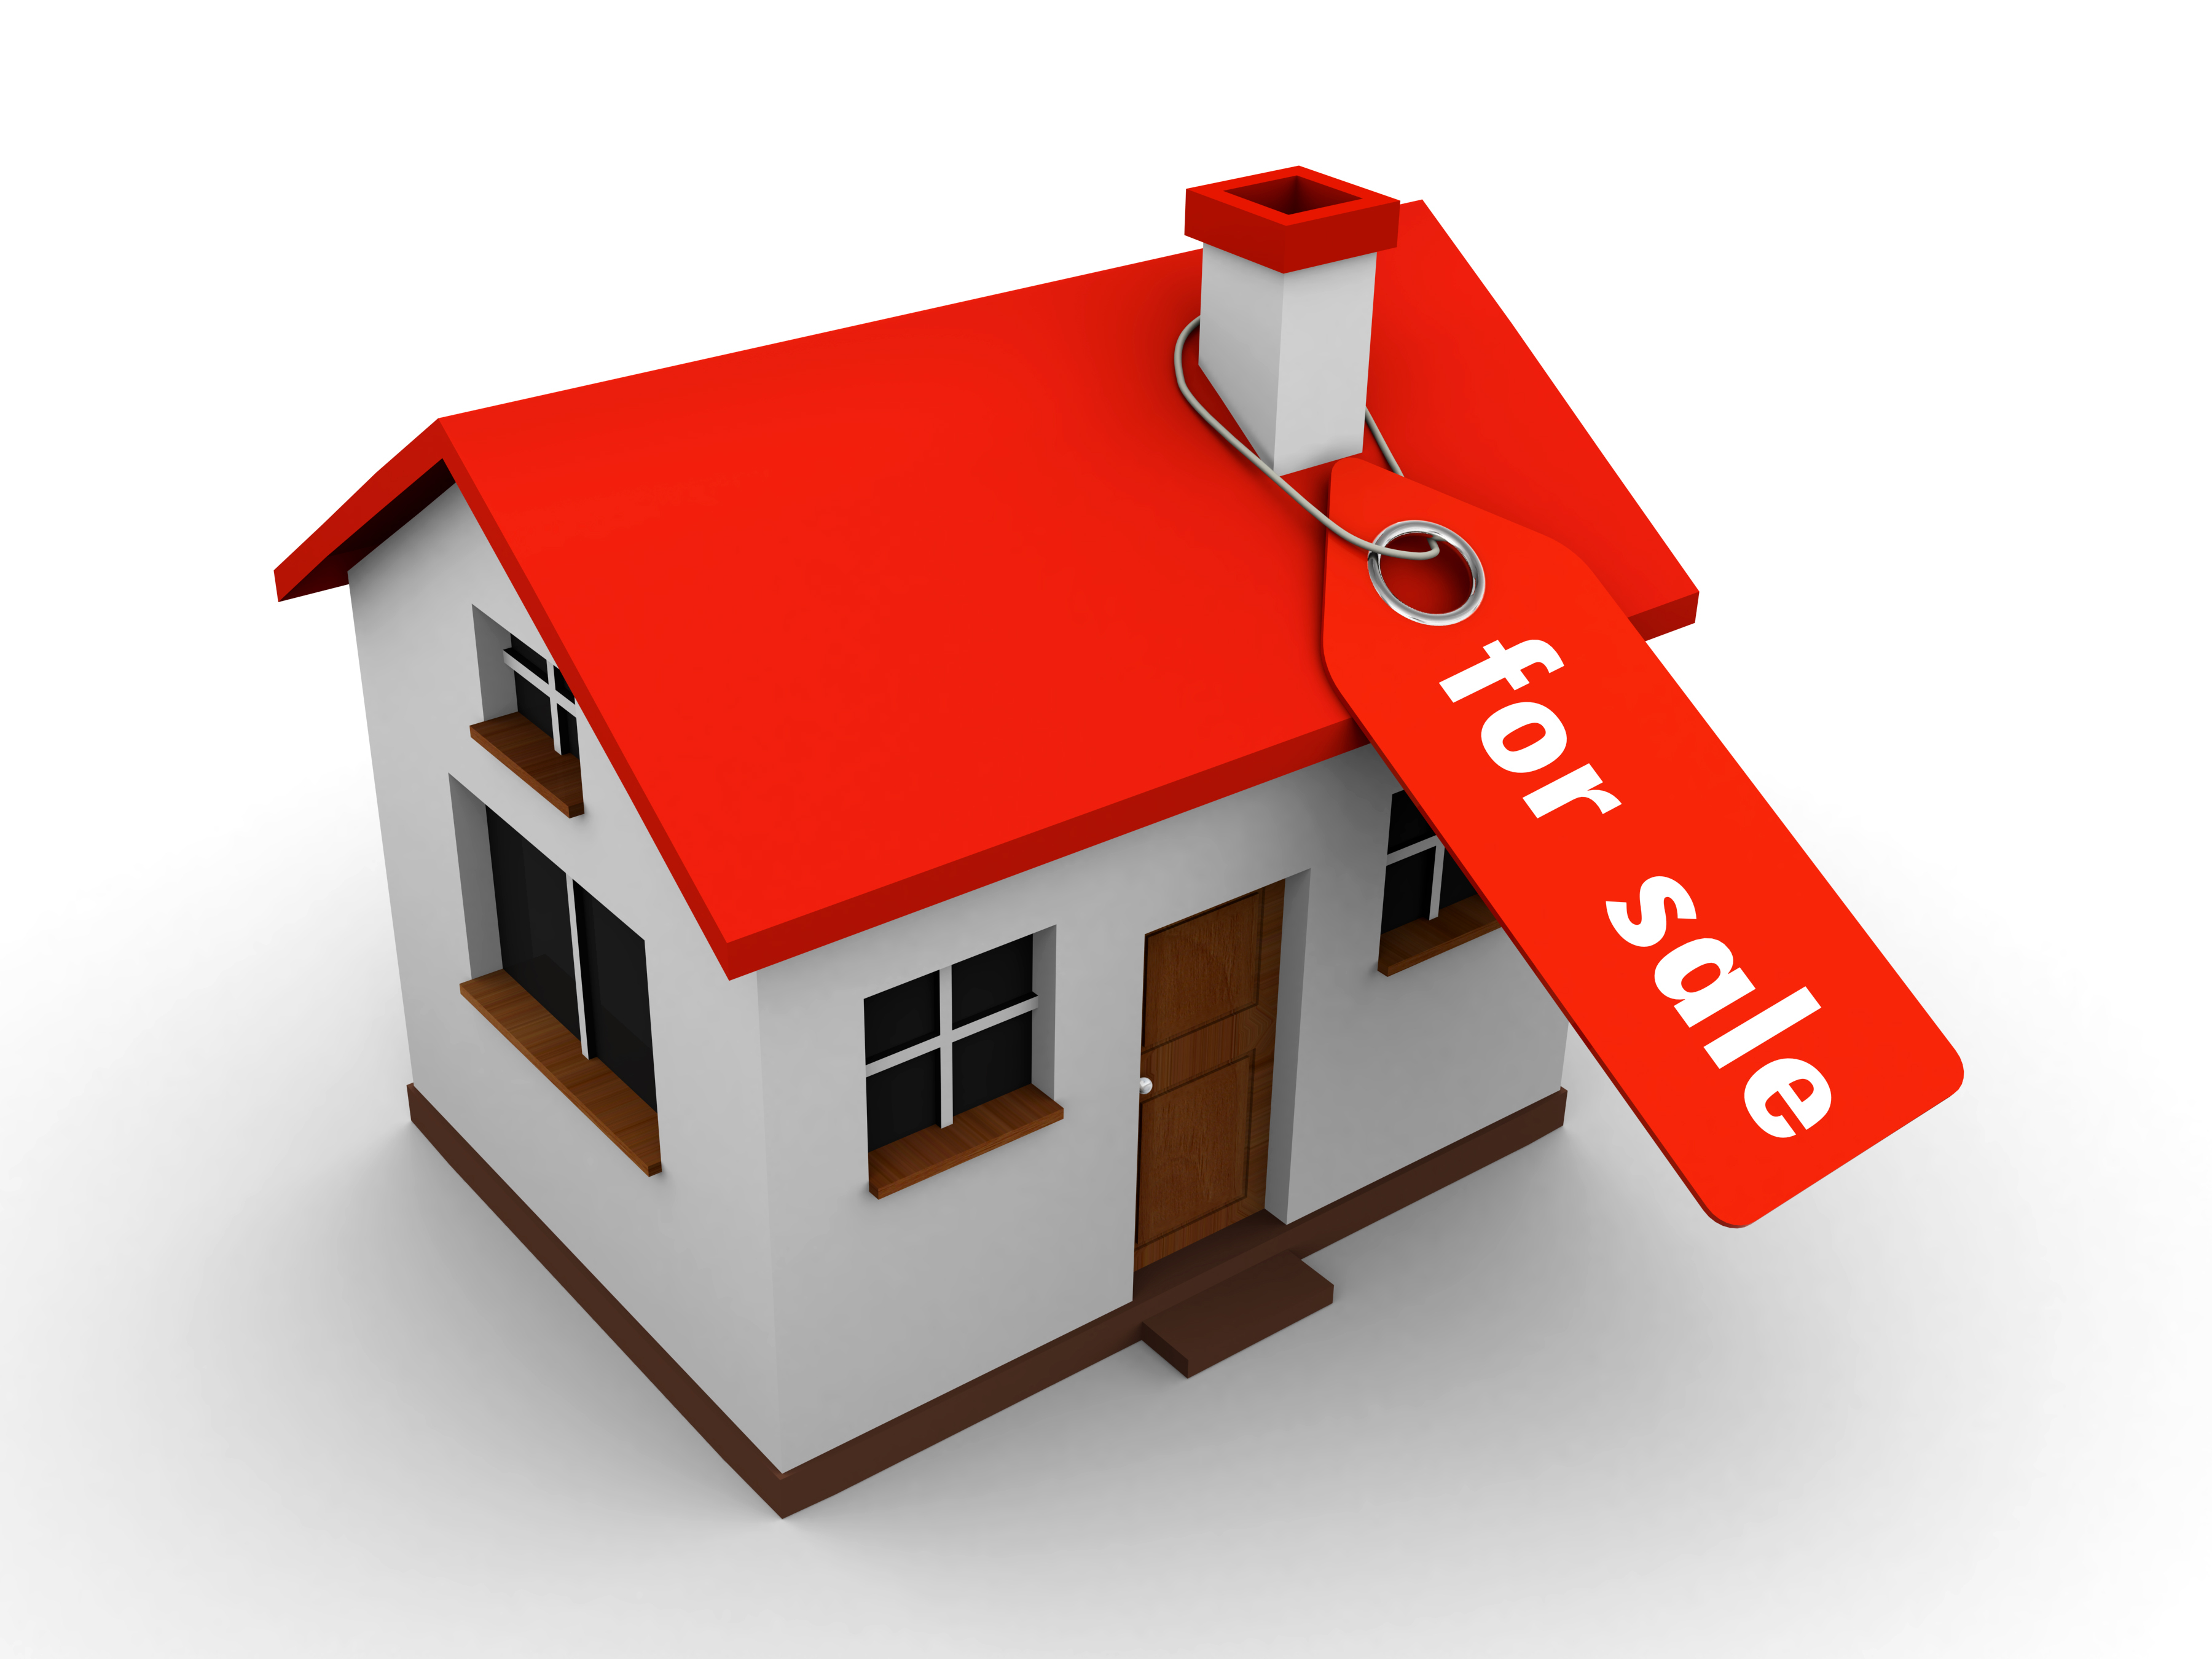 Now simply sell and buy houses online